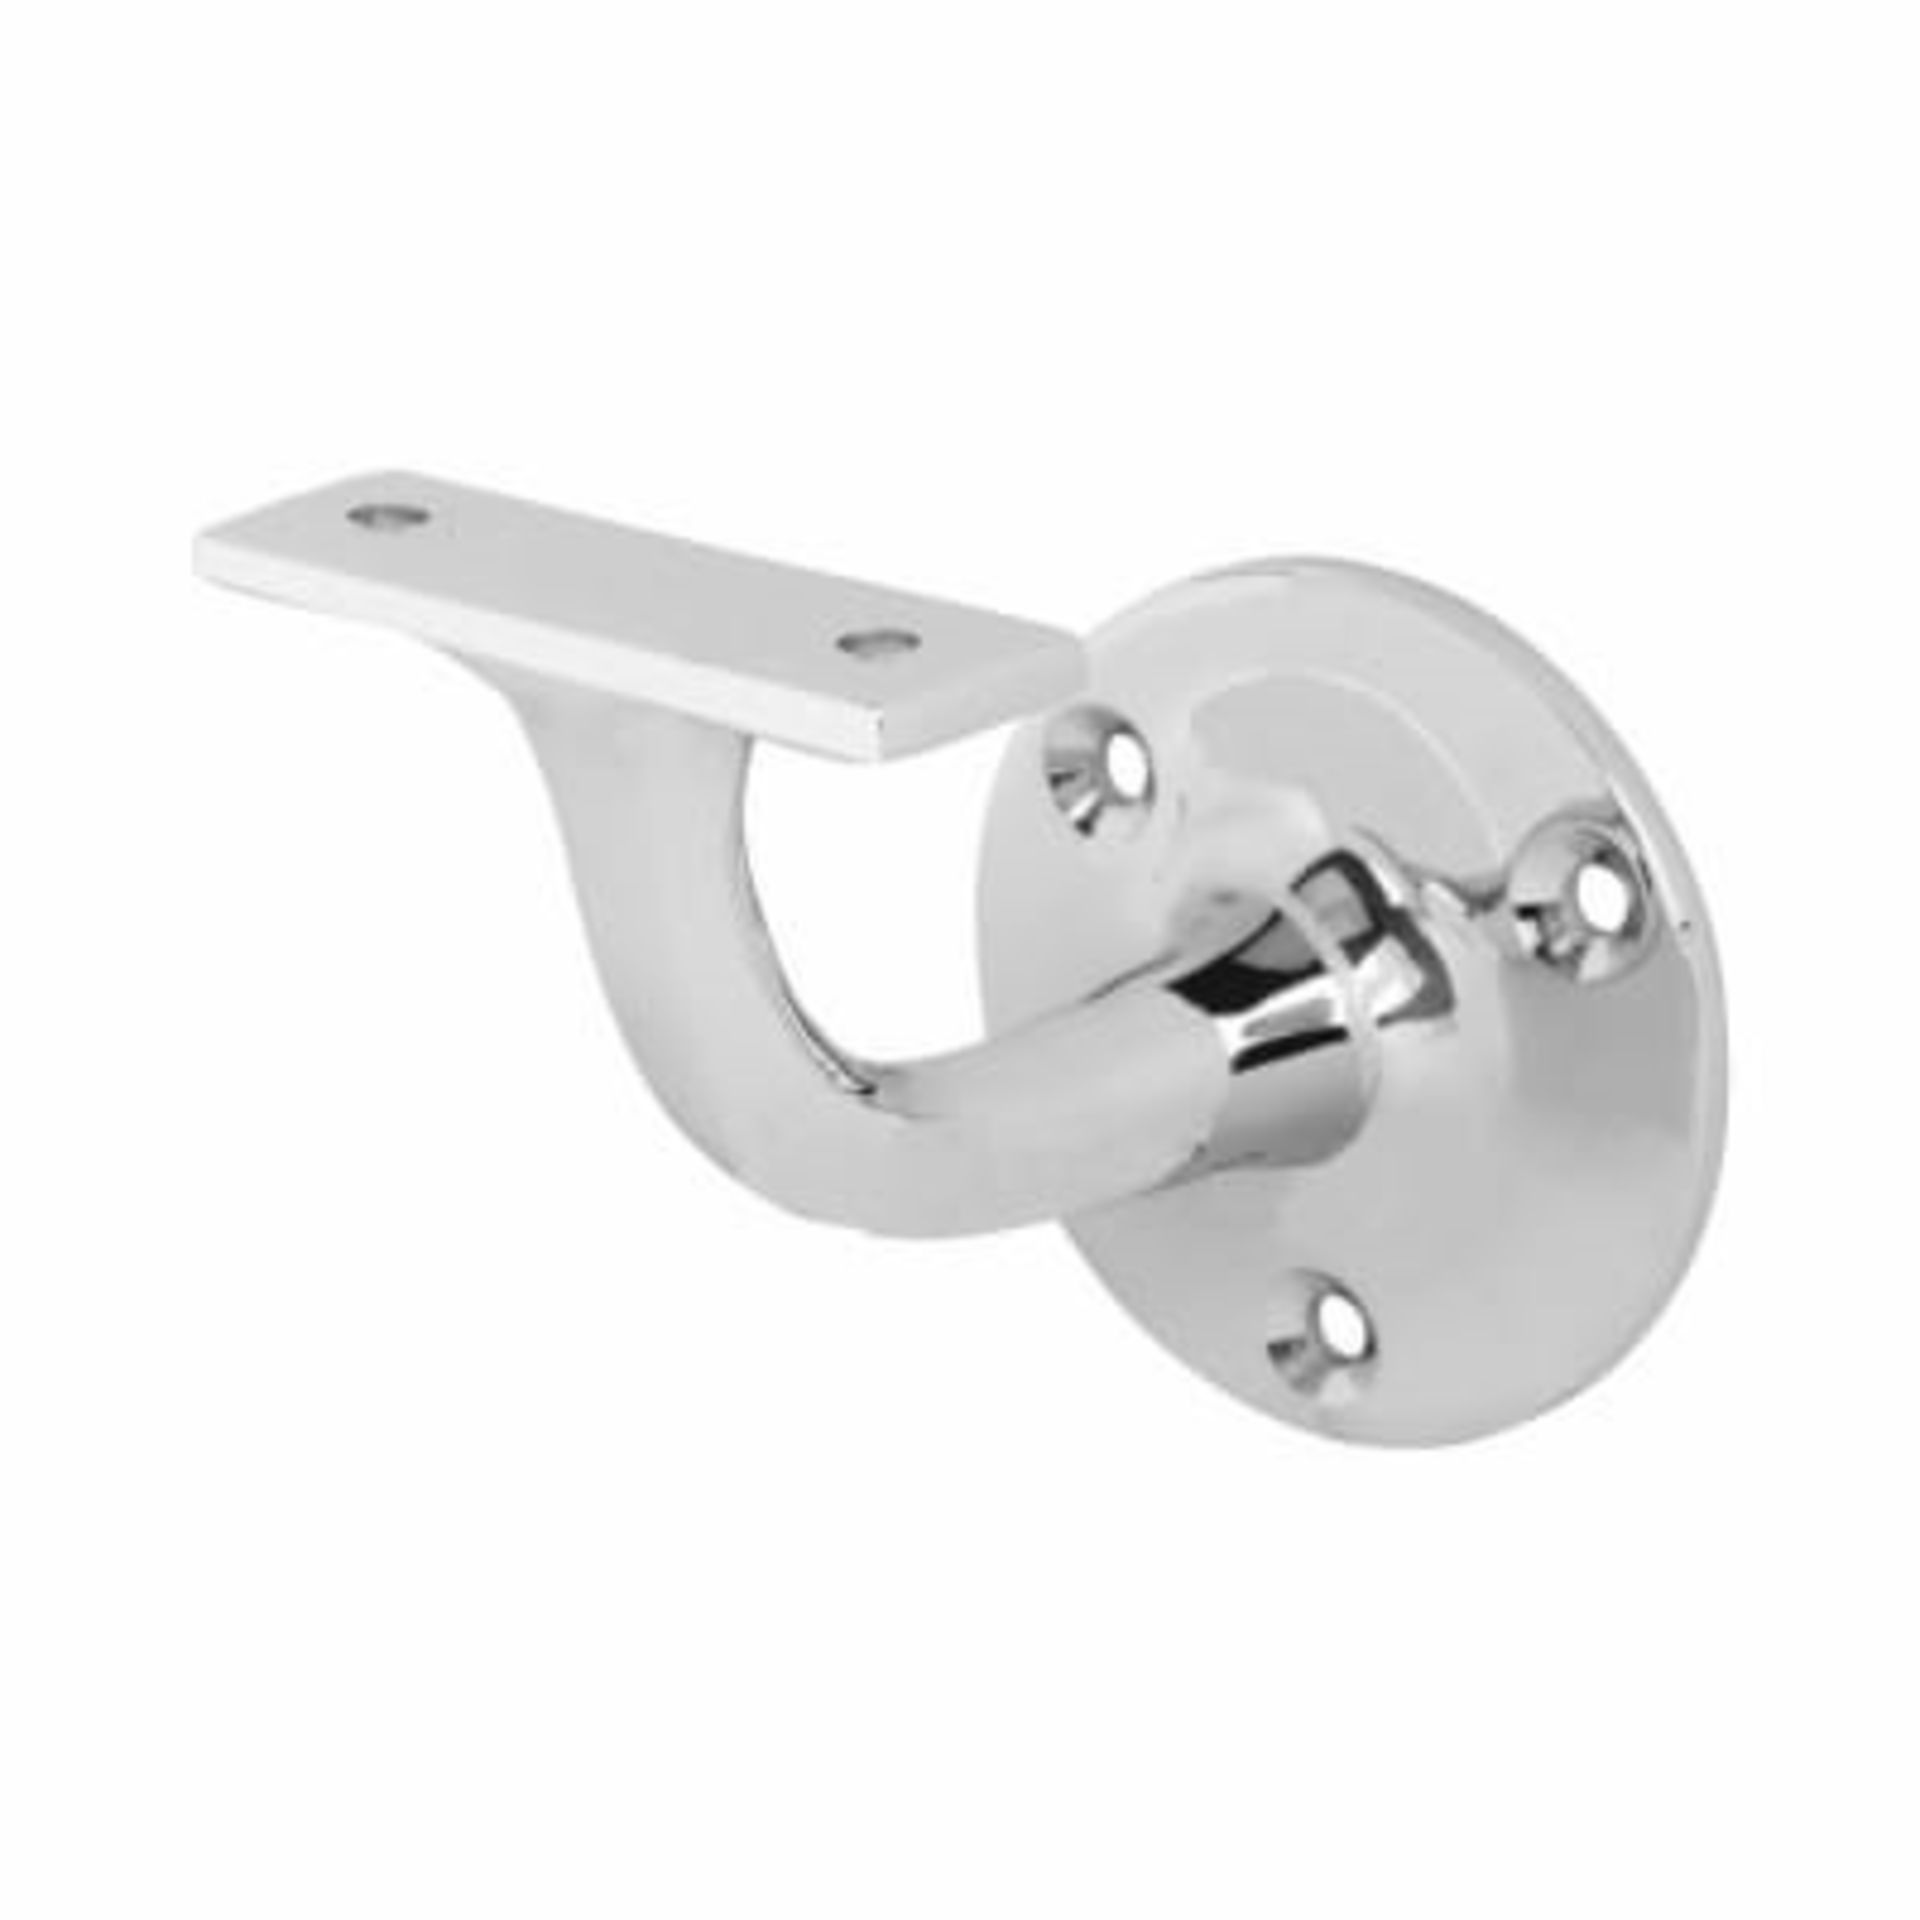 1 BAGGED JEWSON HANDRAIL BRACKET / SIZE 63MM / RRP £9.00 / PN - 626 (PUBLIC VIEWING AVAILABLE)